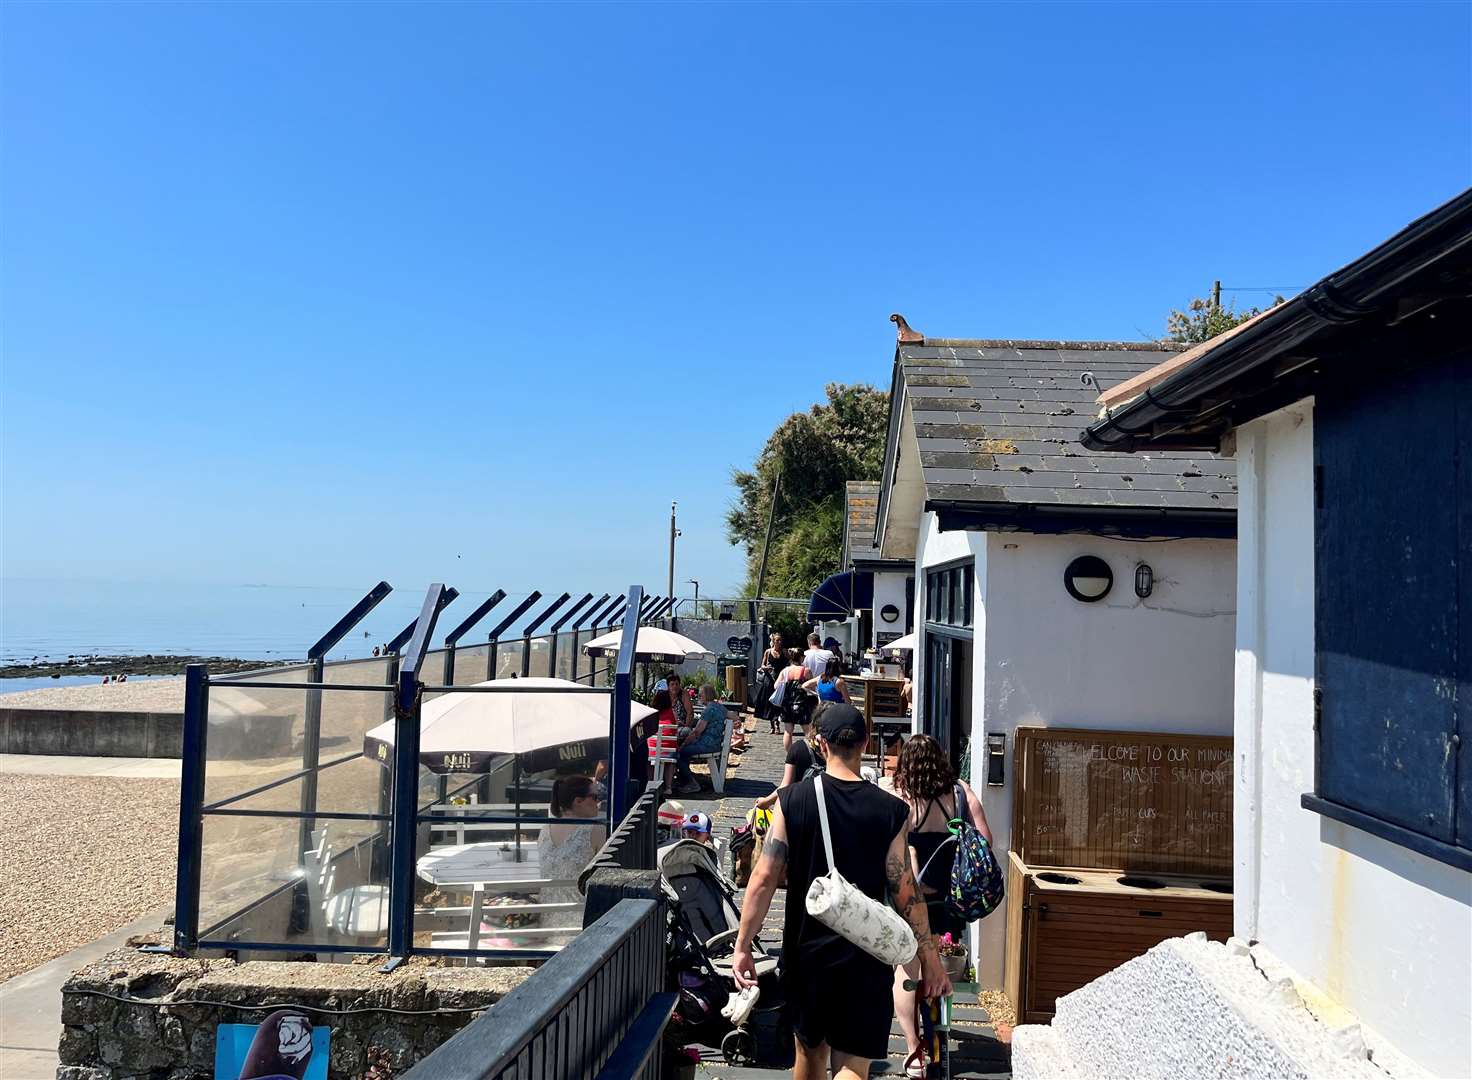 The cafe is located opposite Mermaid Beach and has inside and outdoor seating